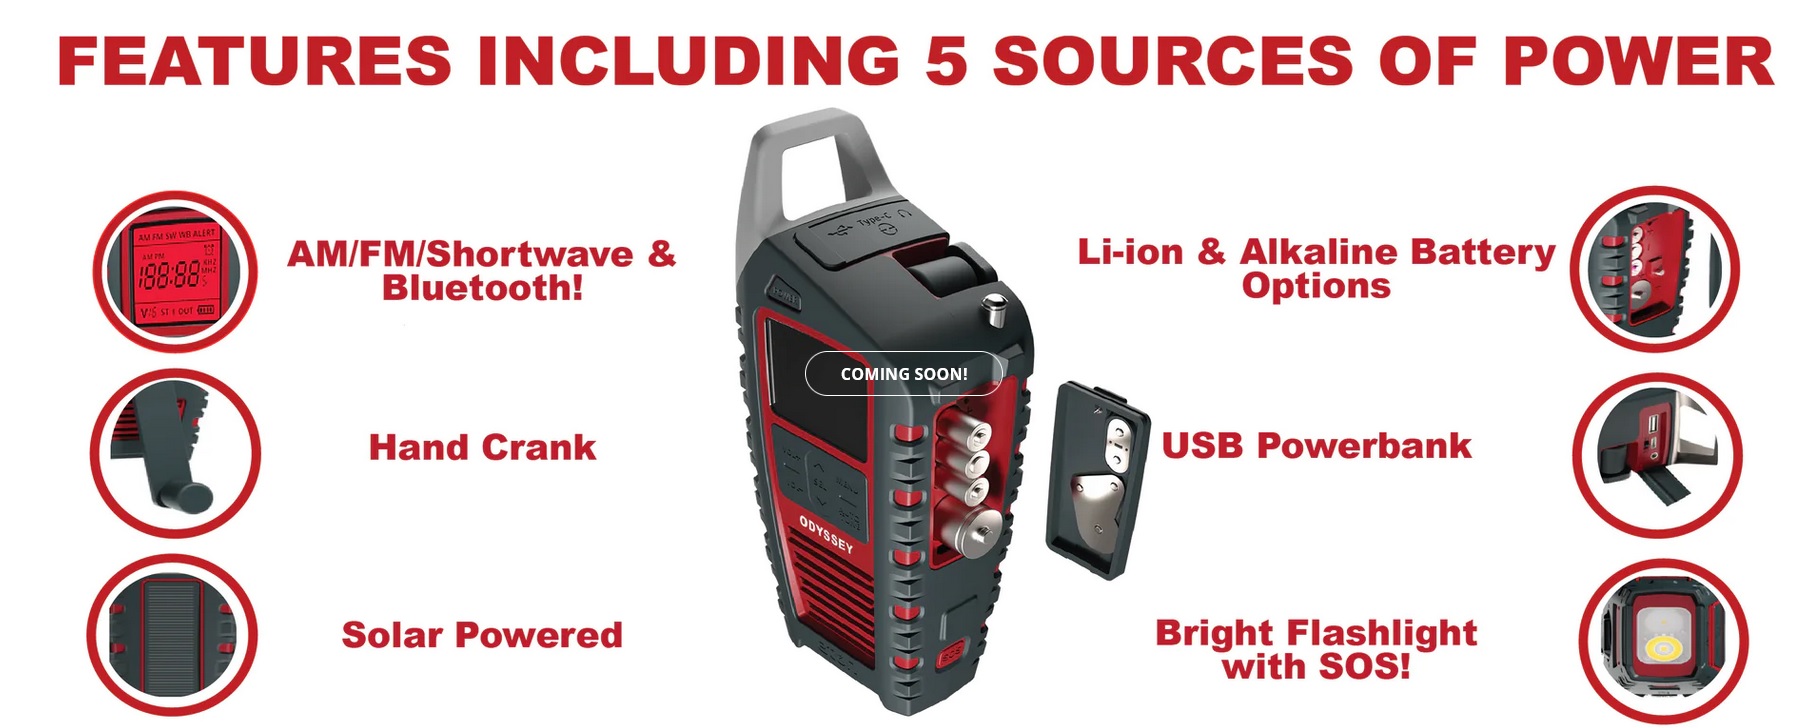 eTon ALL-BAND Emergency Radio with Bluetooth 5 Sources of Power